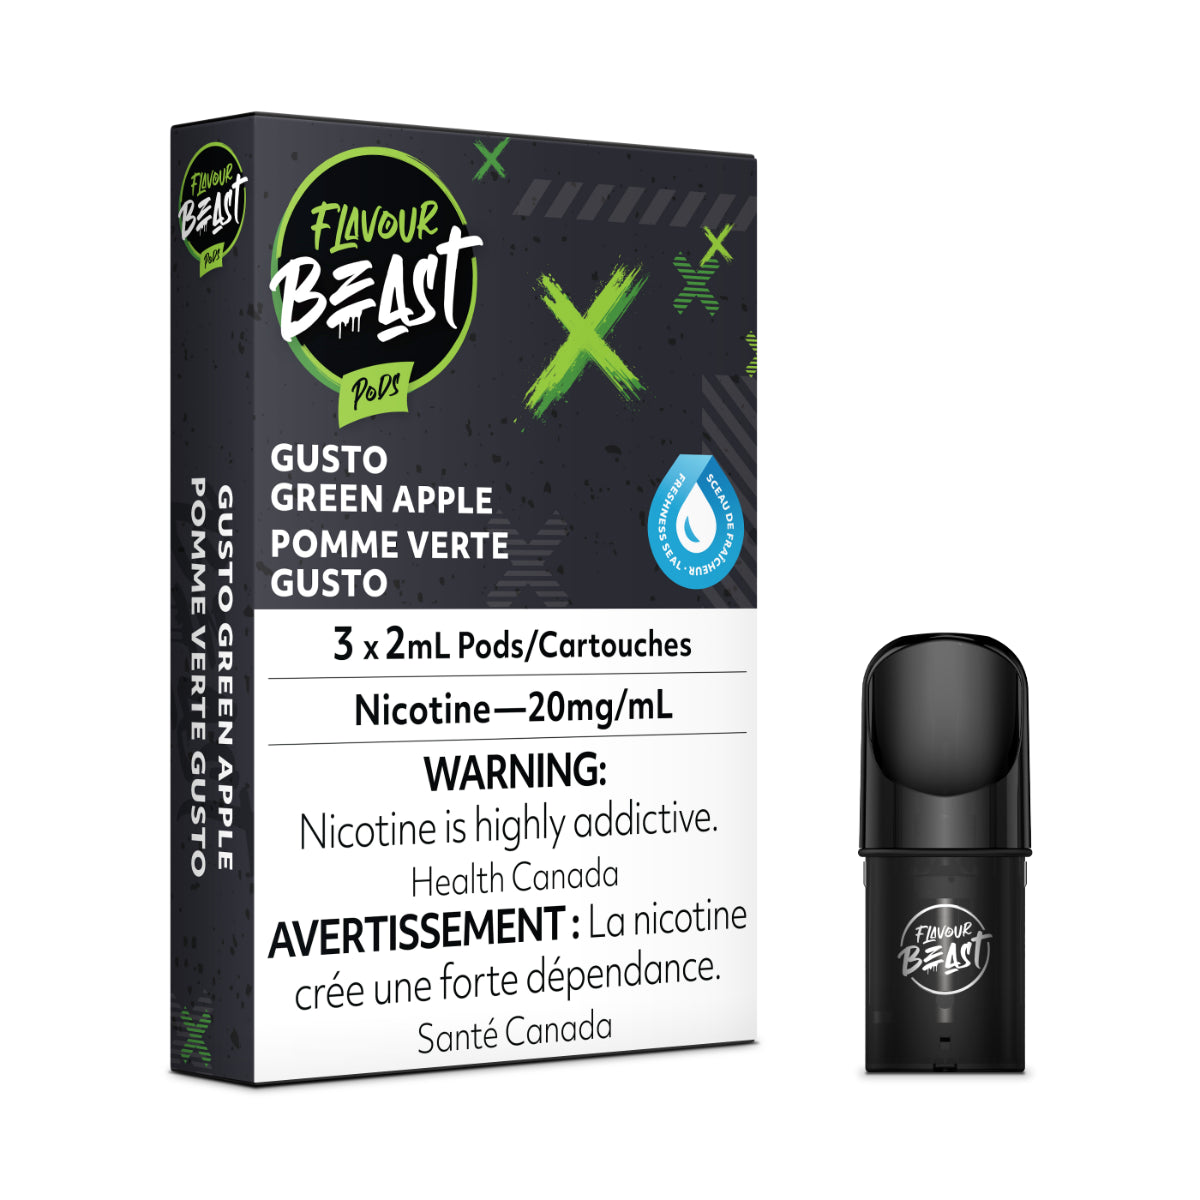 Gusto Green Apple - Flavour Beast Pod Pack - 20mg - EXCISED